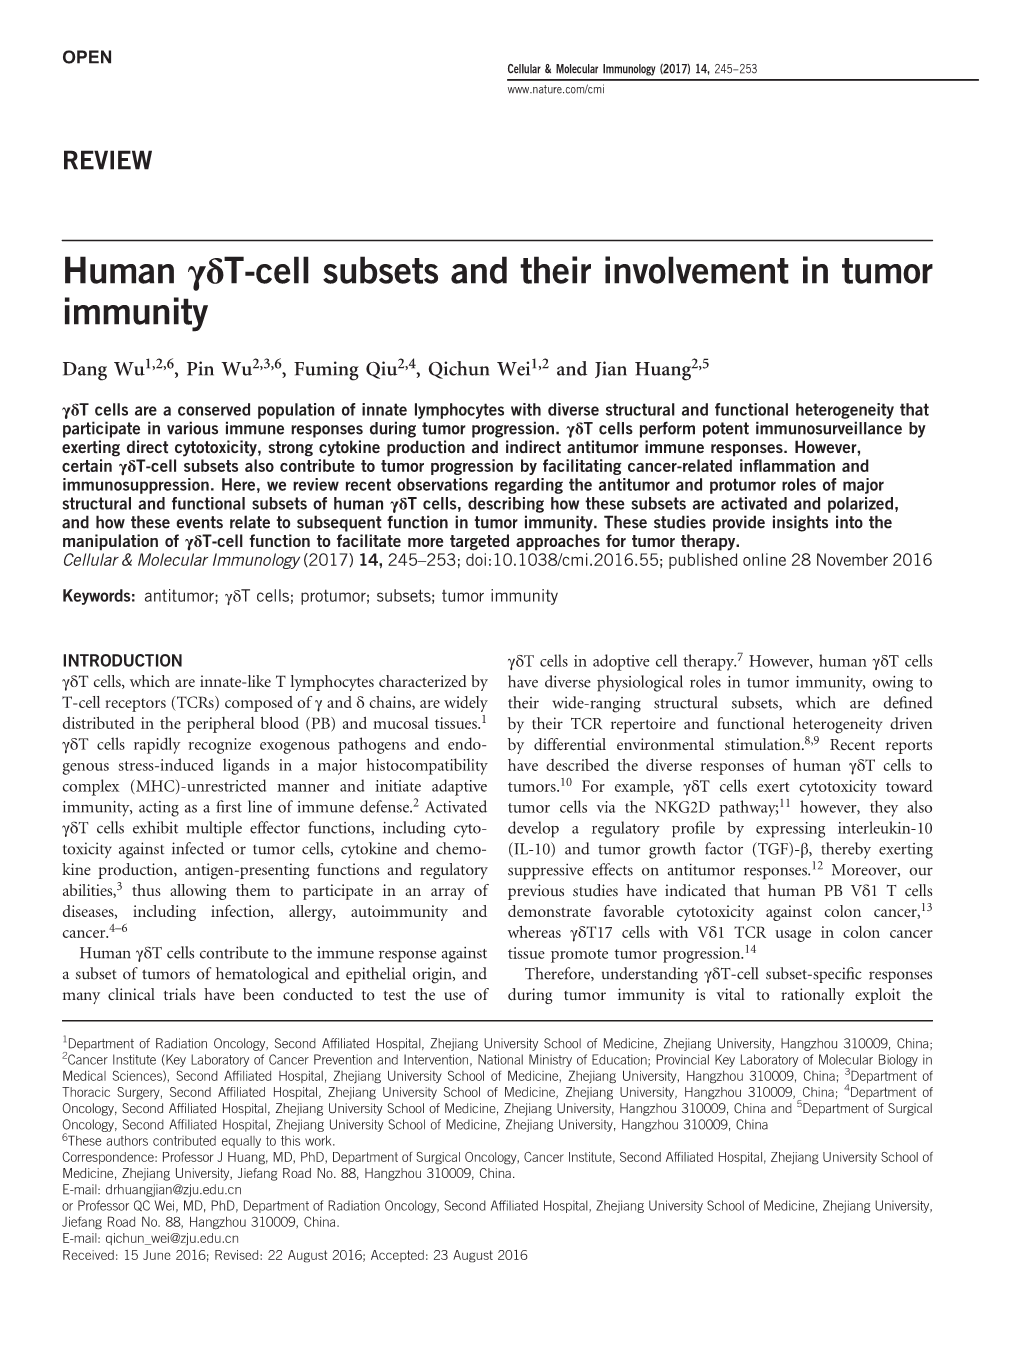 Human Γδt-Cell Subsets and Their Involvement in Tumor Immunity